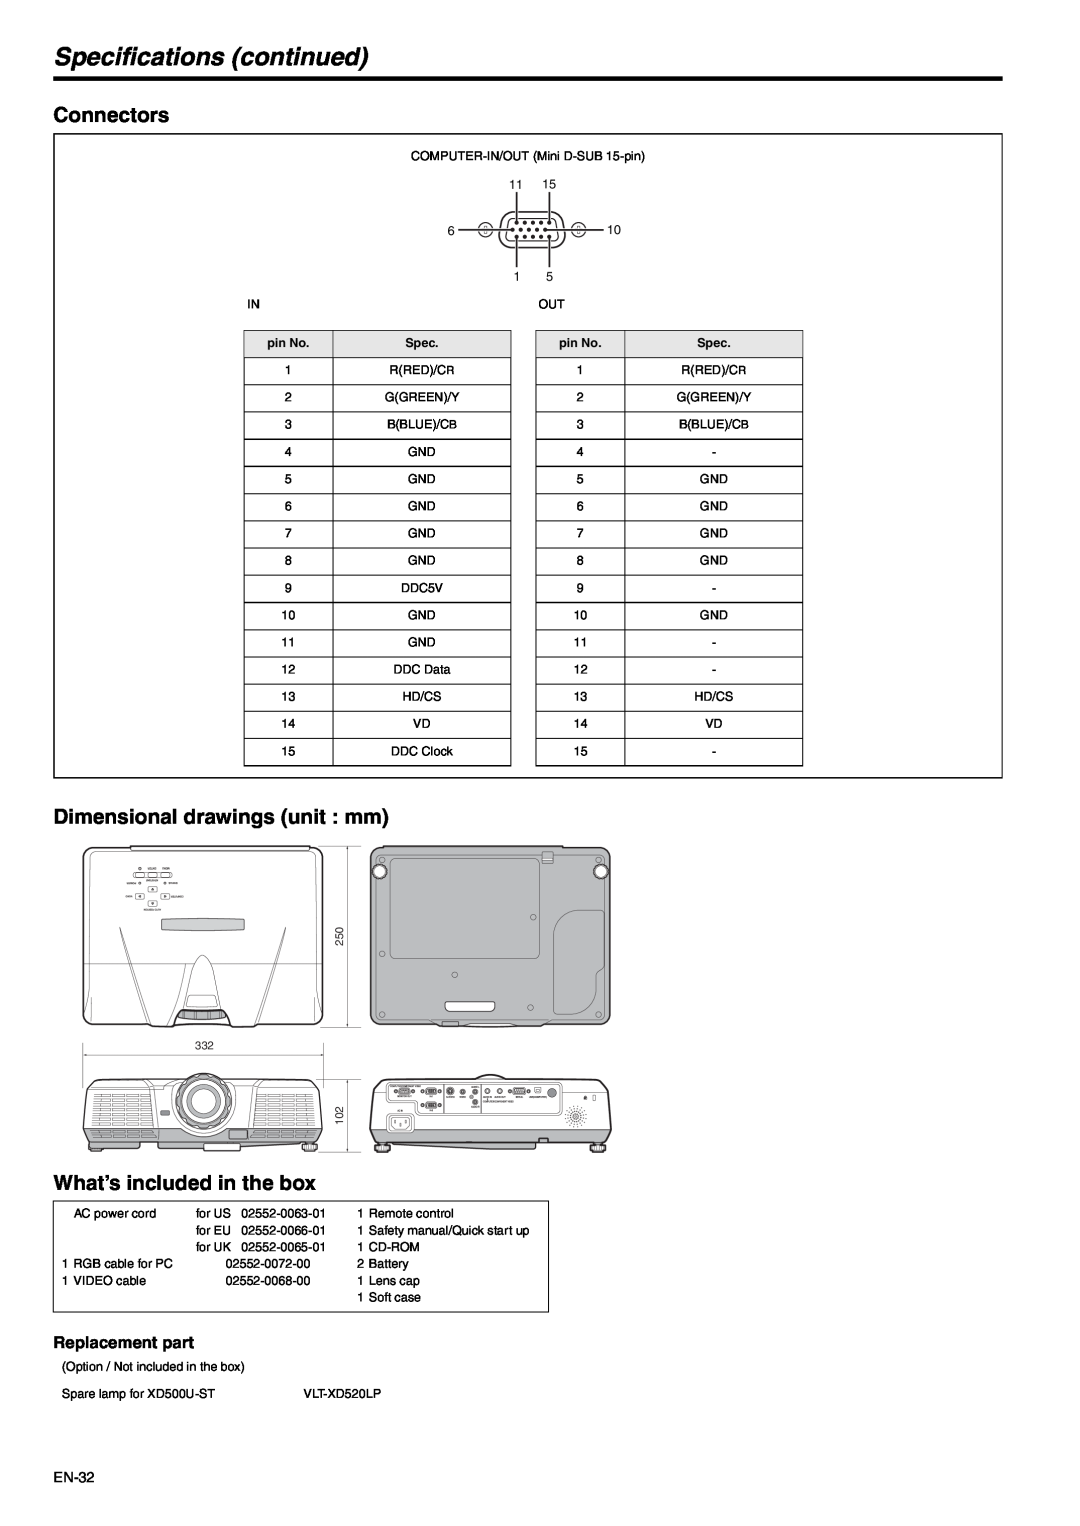 Mitsubishi Electronics XD500U-ST Specifications continued, Connectors, Dimensional drawings unit mm, Replacement part 